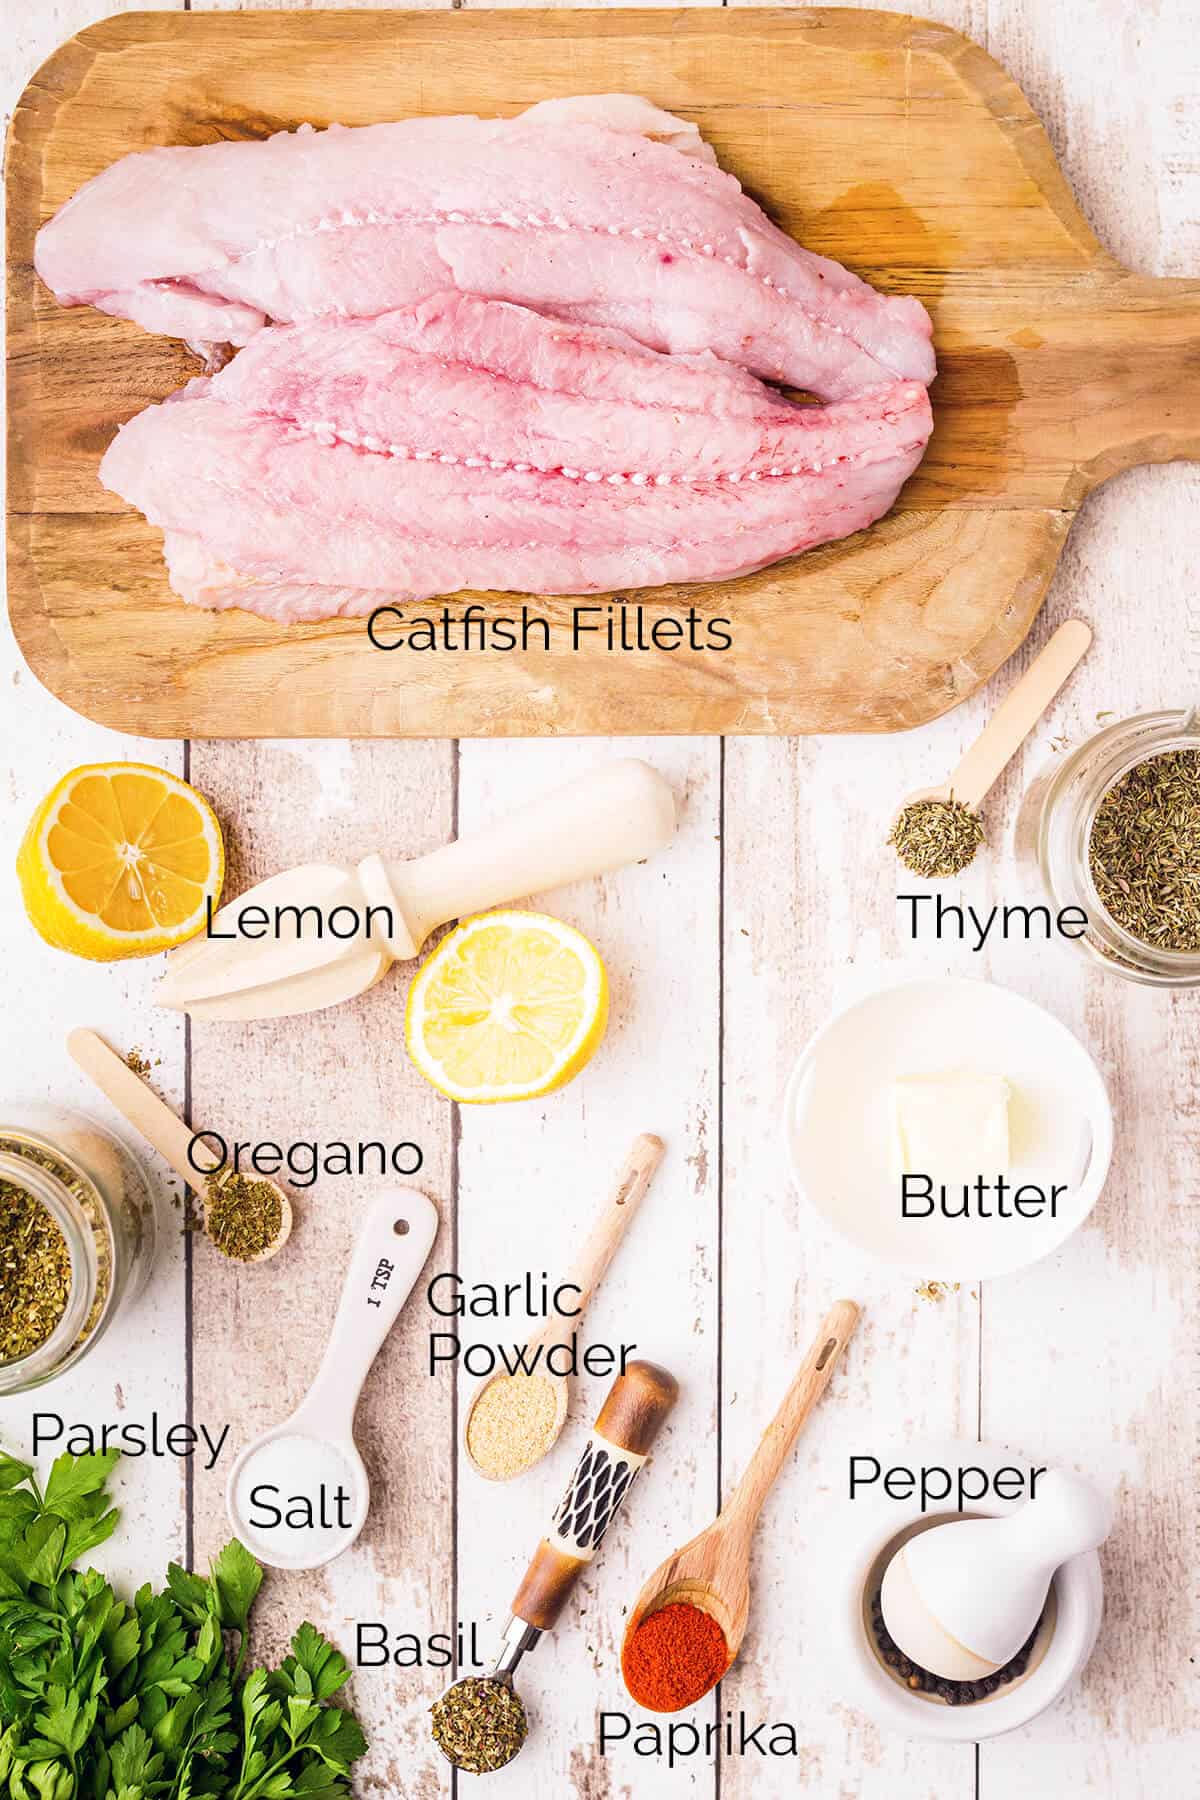 Photo of all ingredients needed for the recipe.